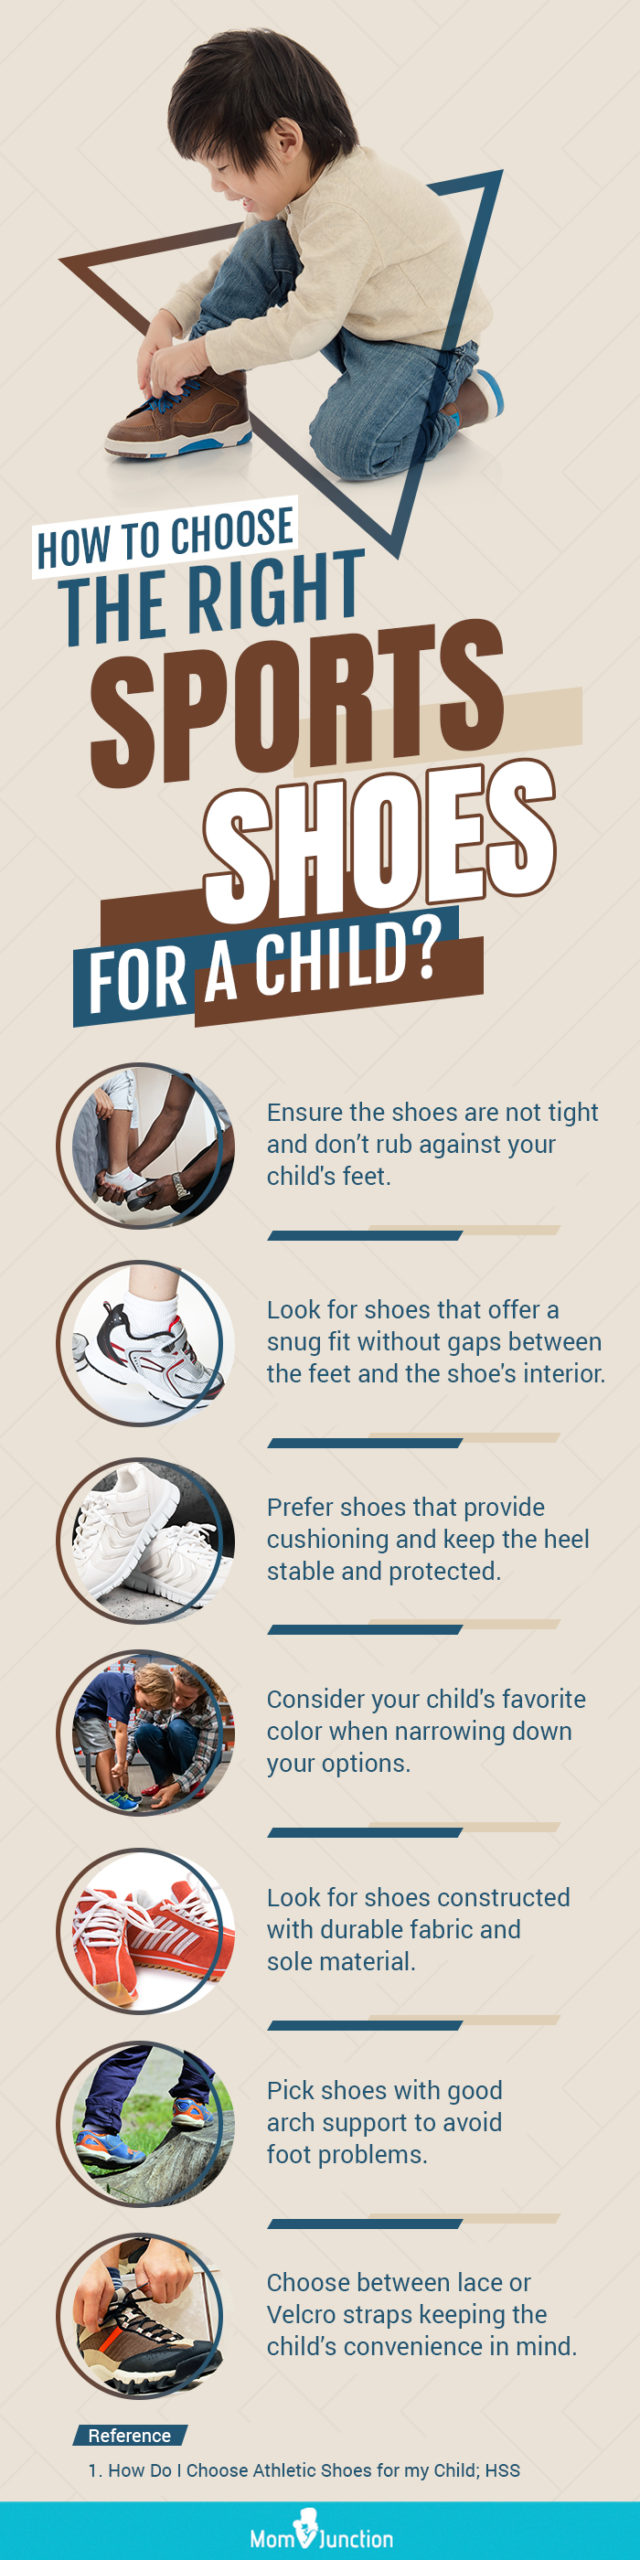 How To Choose The Right Sports Shoes For A Child (infographic)